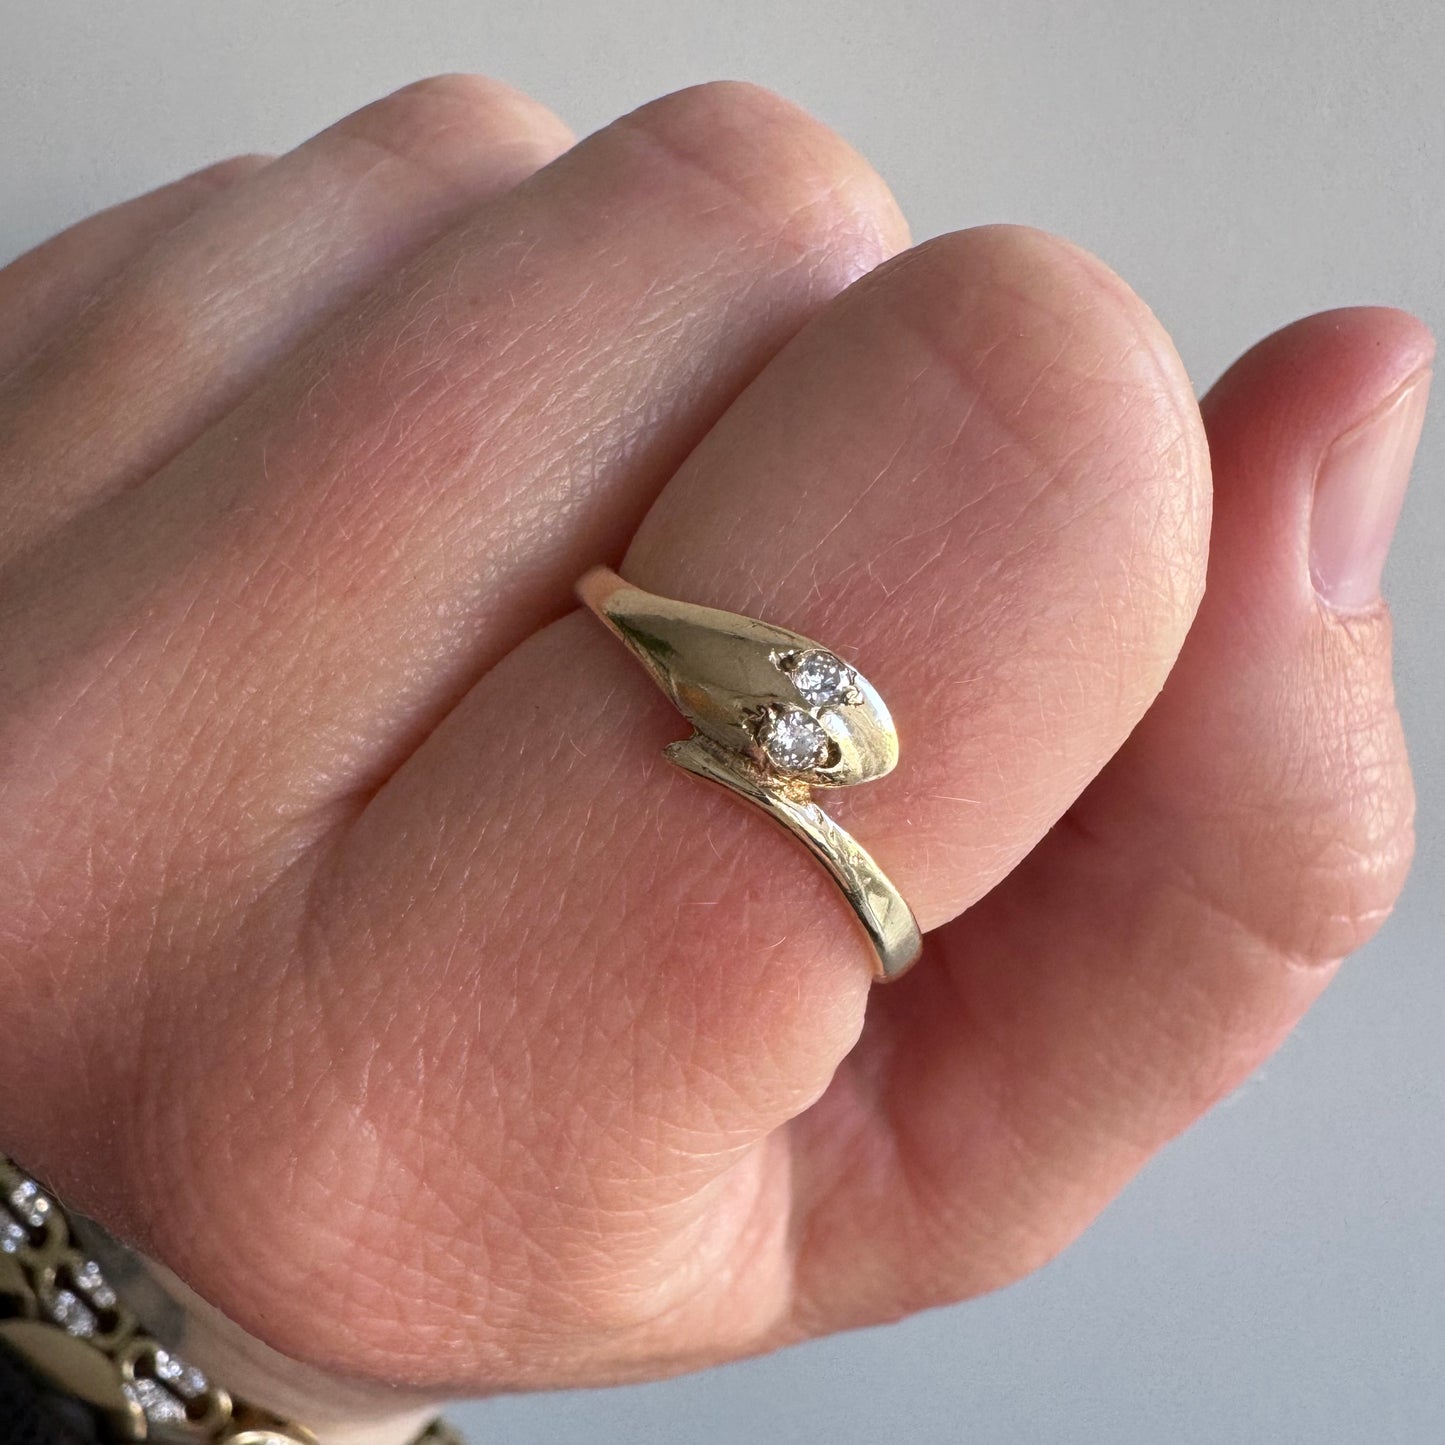 V I N T A G E // slithering stacker / 9k yellow gold and diamond wrap around snake ring / size 7.5